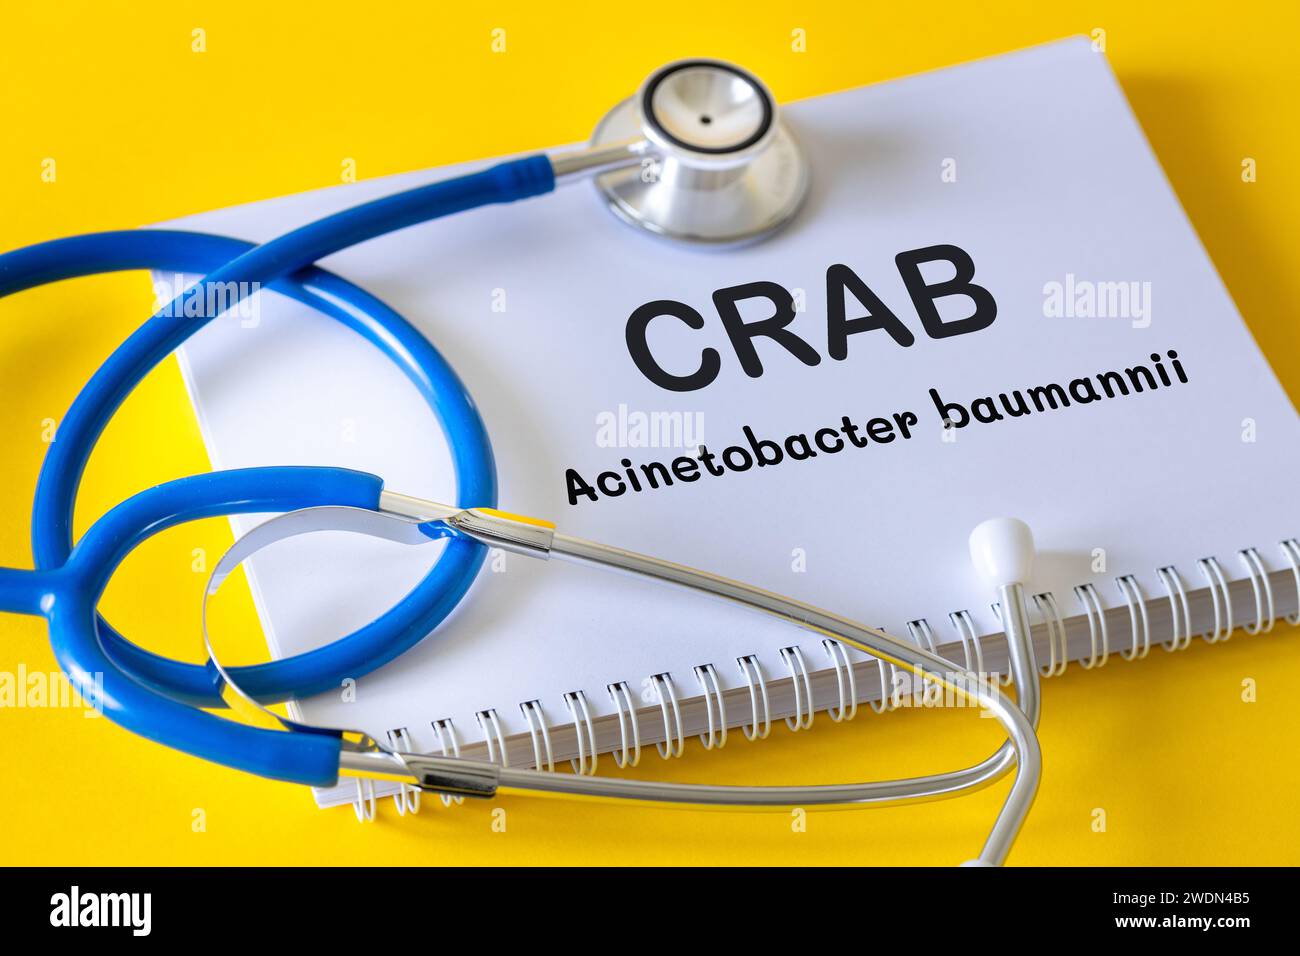 Crab, Acinetobacter baumannii bacterium, dangerous antibiotic resistant pathogens, medical science concept, text in doctor's notebook lying next to st Stock Photo